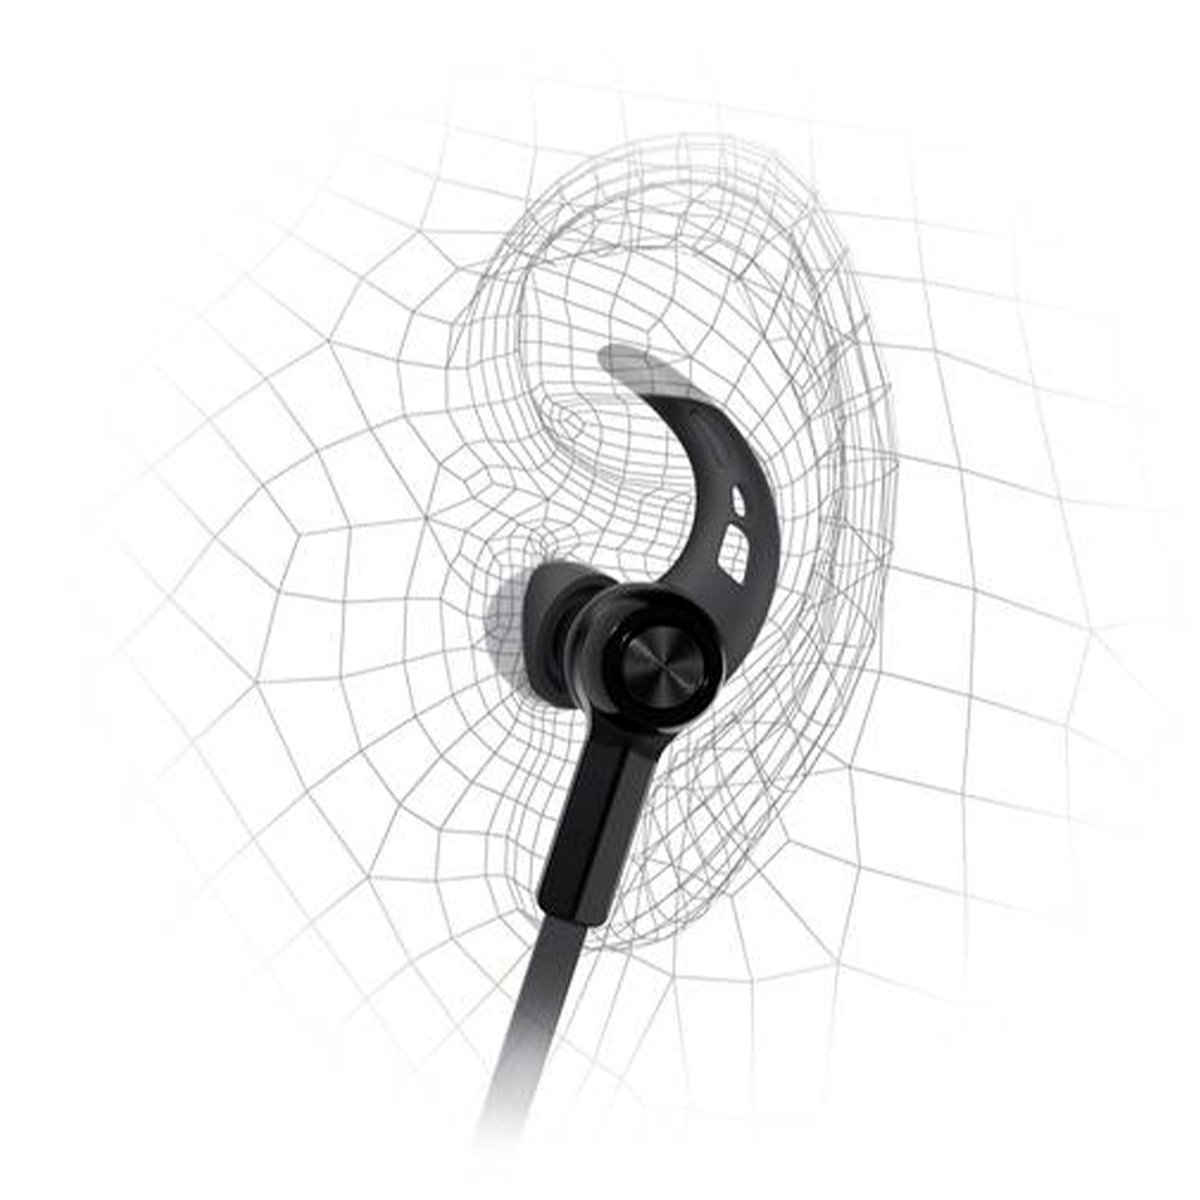 Aukey Magnetic Wireless Earbuds EP-B62 Black